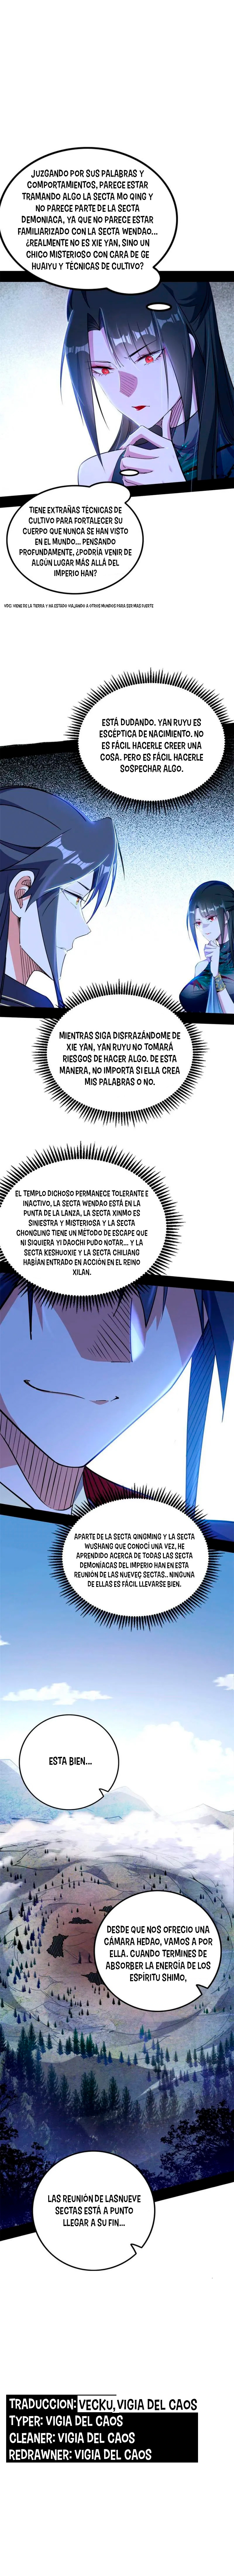 Manga Soy un dios maligno Chapter 315 image number 4